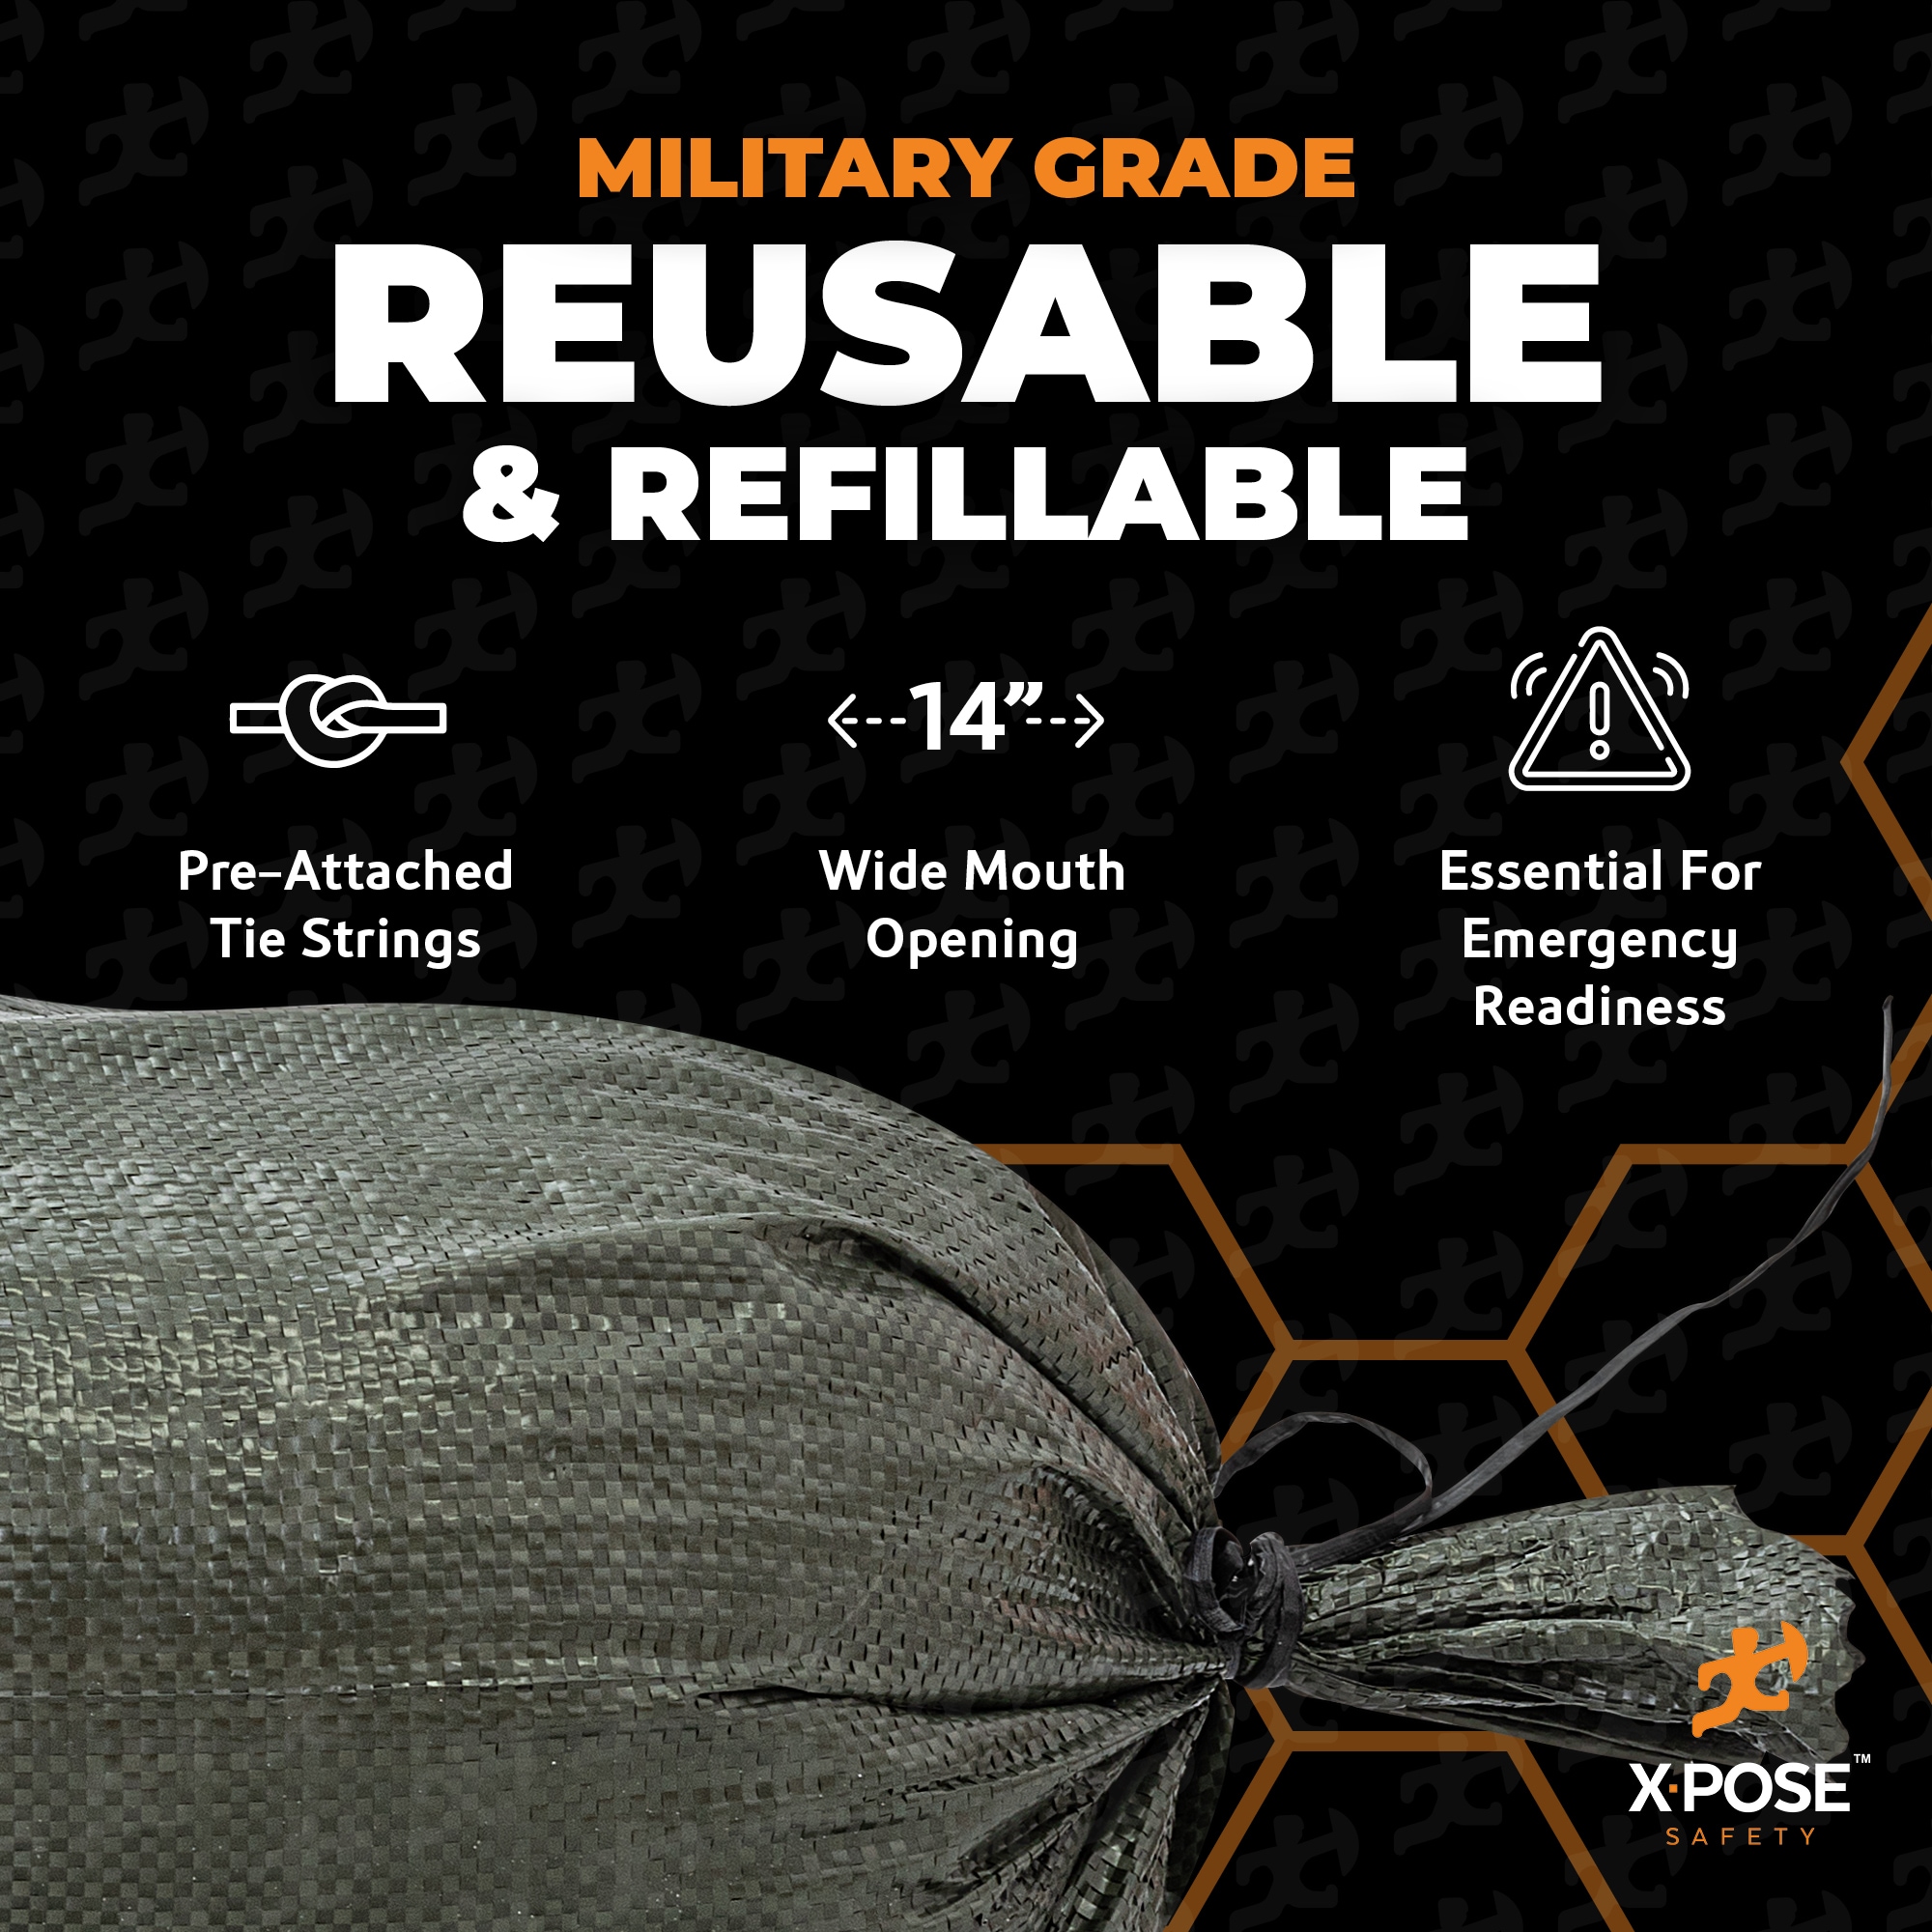 Material Sales Unlimited Building Aggregate 1200-lb Capacity Woven  Polypropylene Sand-Bag in the Sand Bags department at